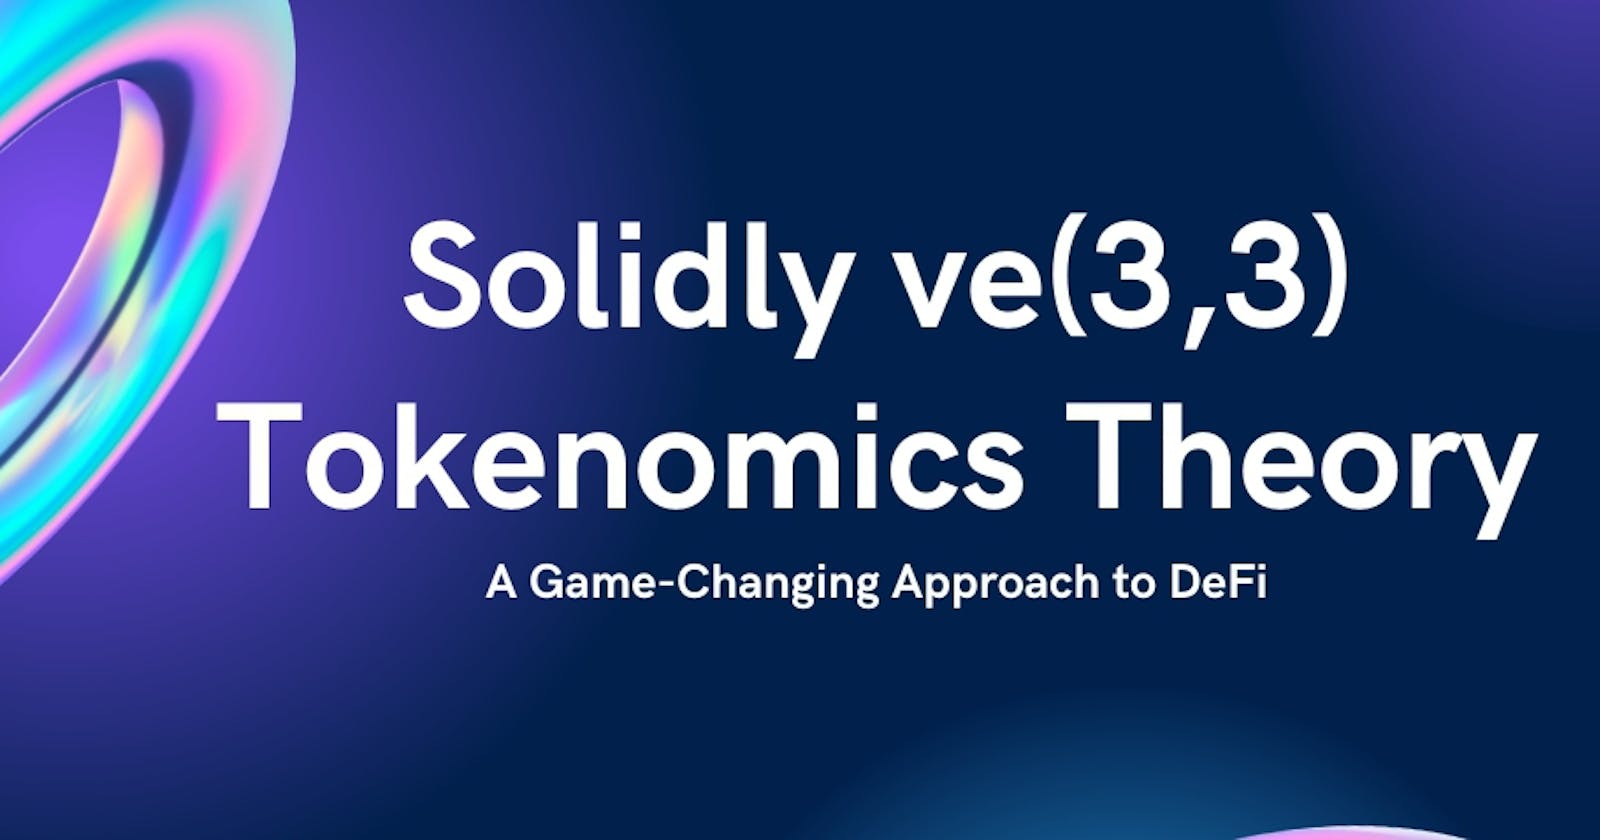 Solidly ve(3,3) Tokenomics Theory: A Game-Changing Approach to DeFi